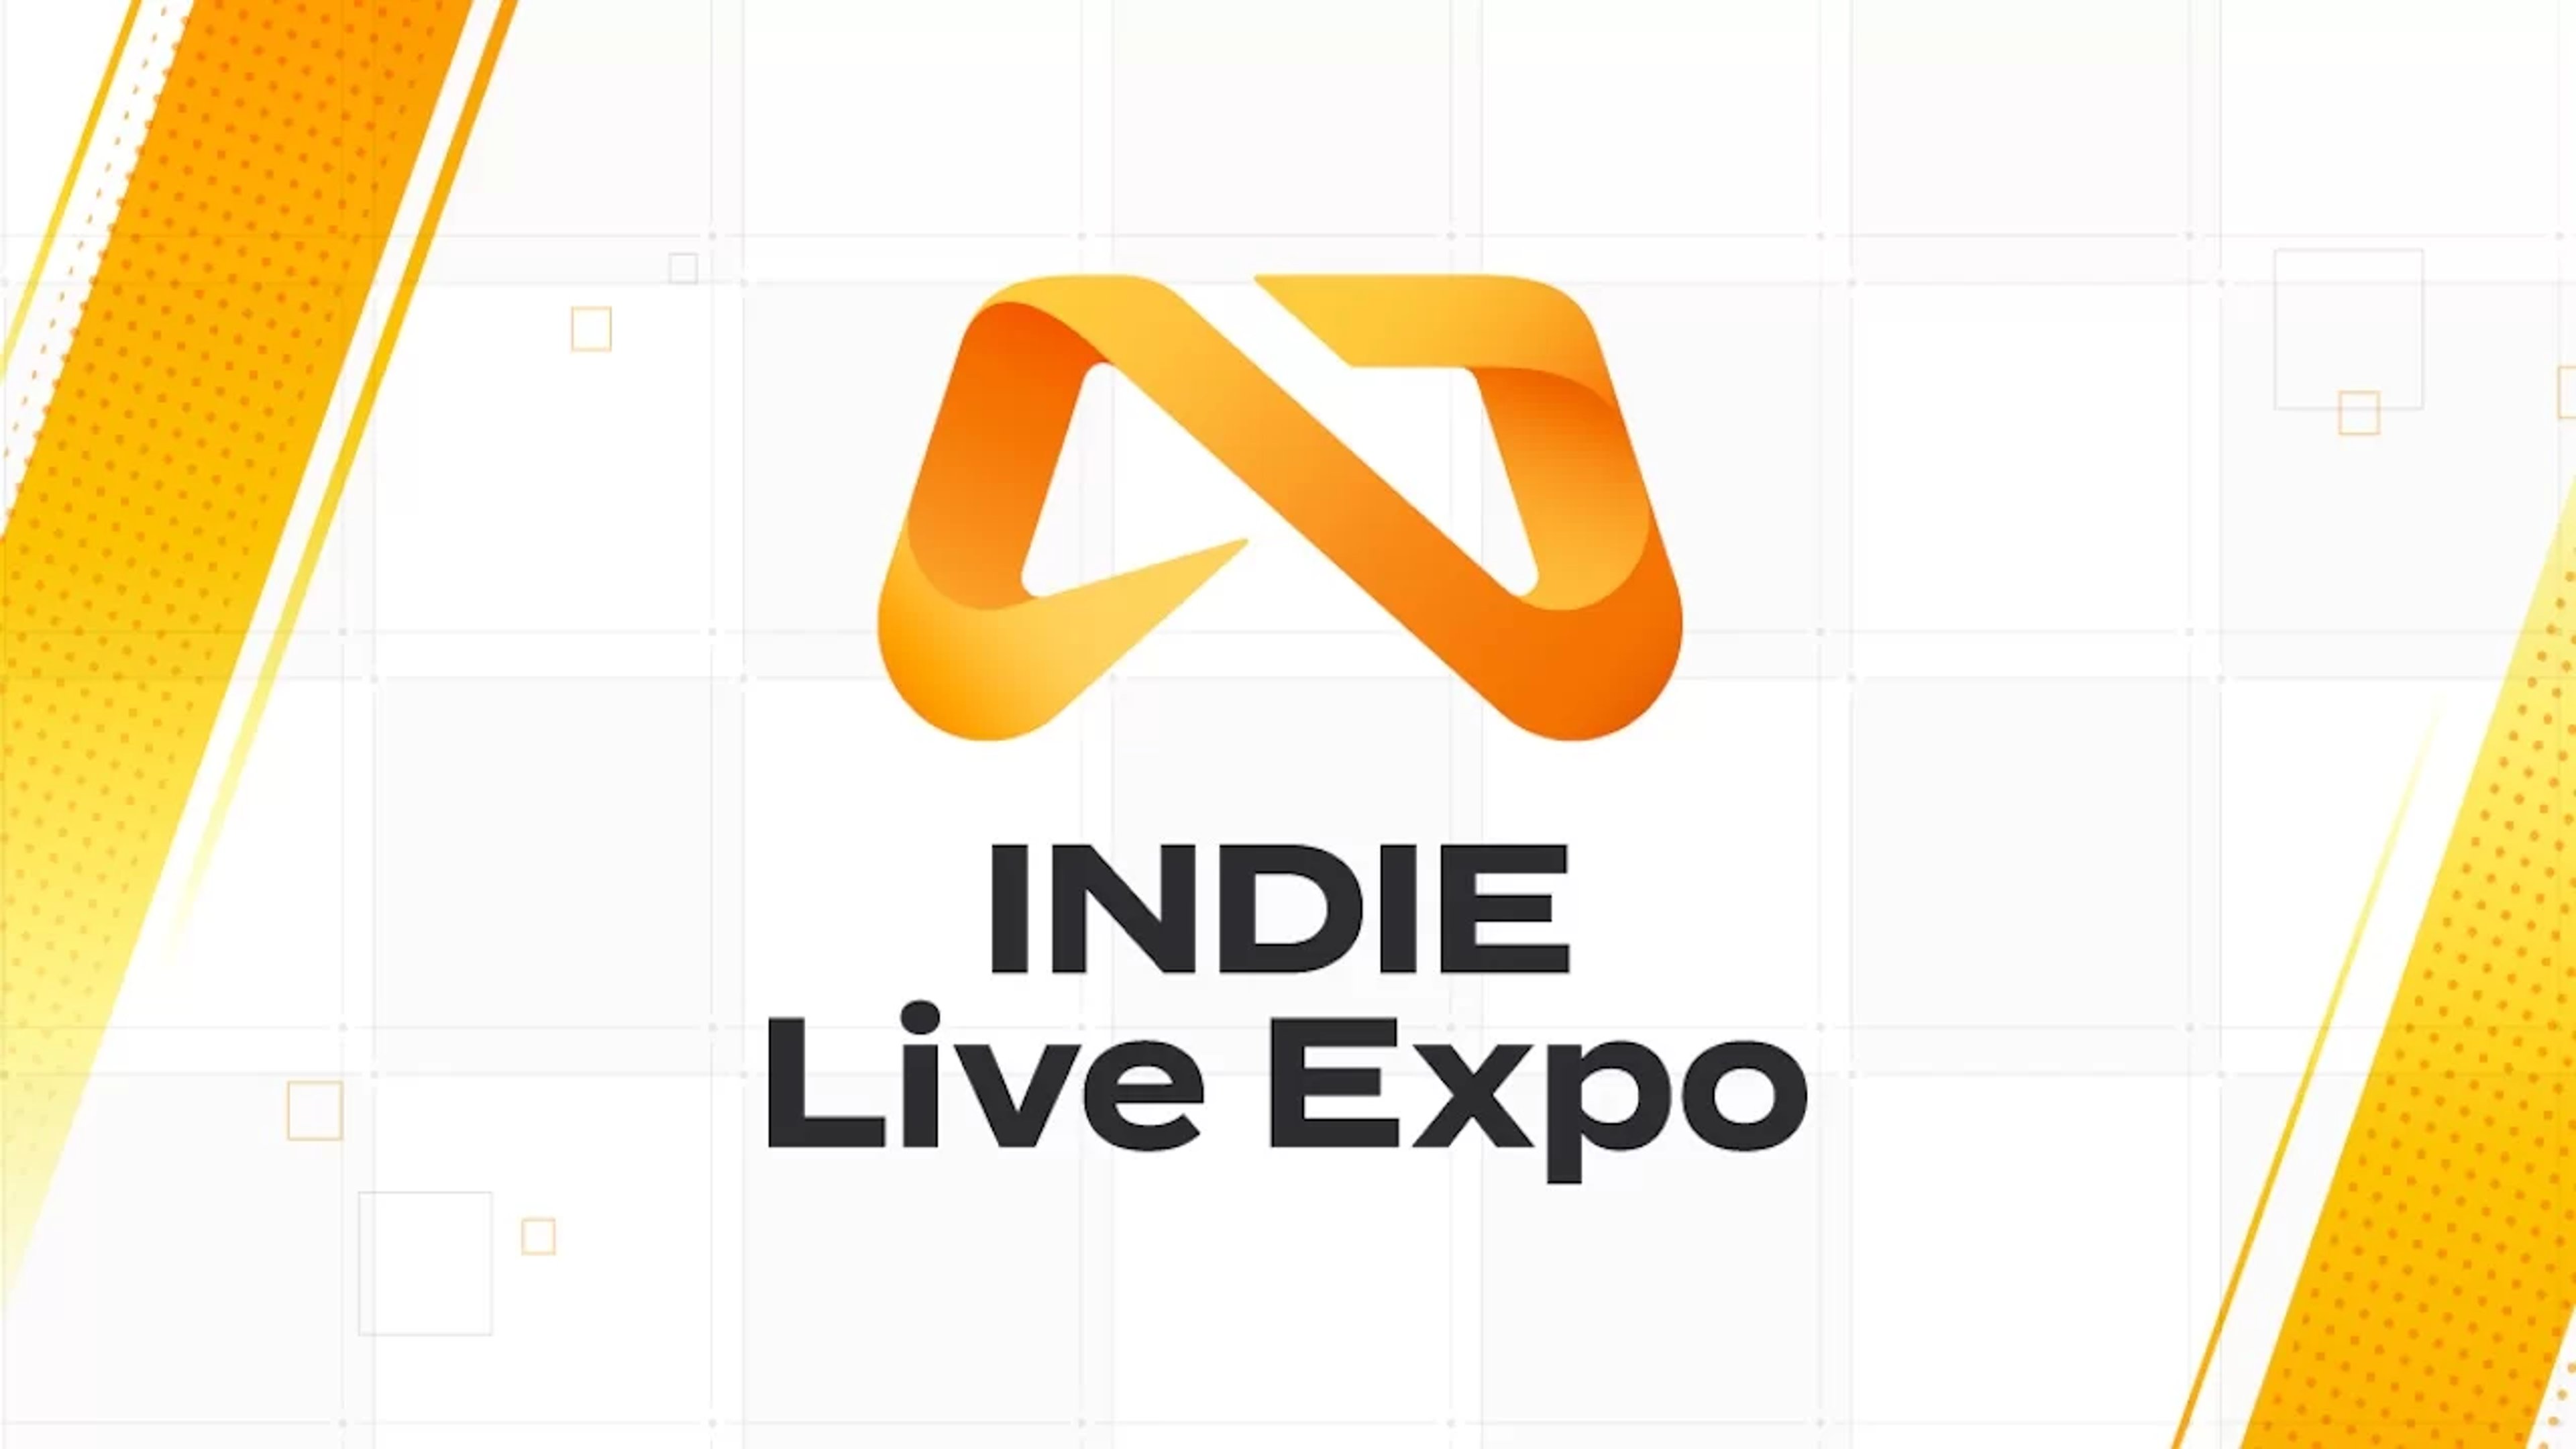 Summer Game Event - INDIE Live